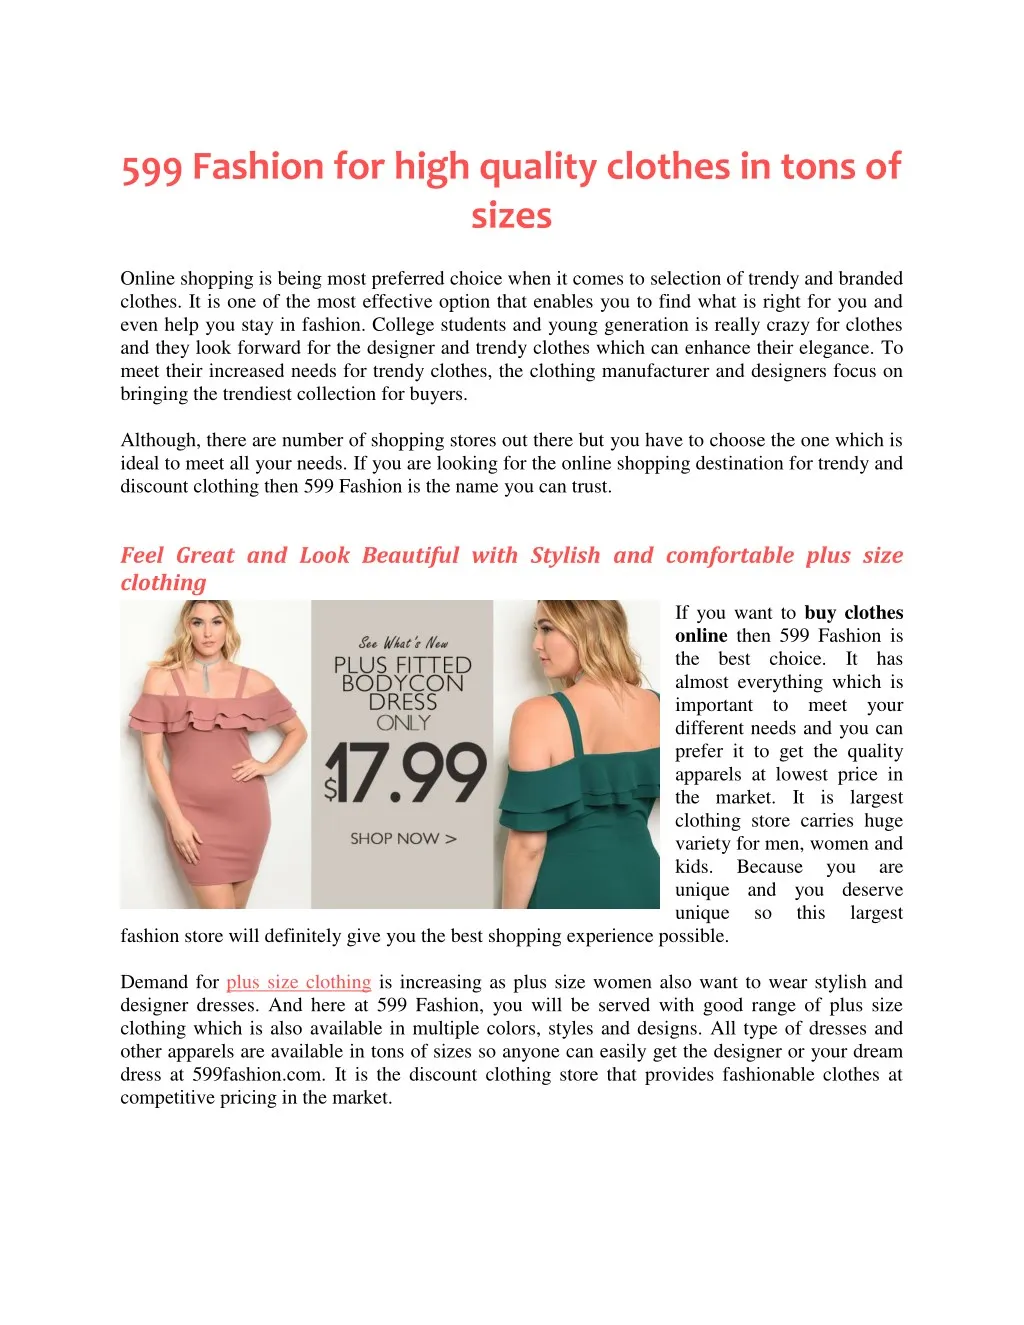 599 fashion for high quality clothes in tons